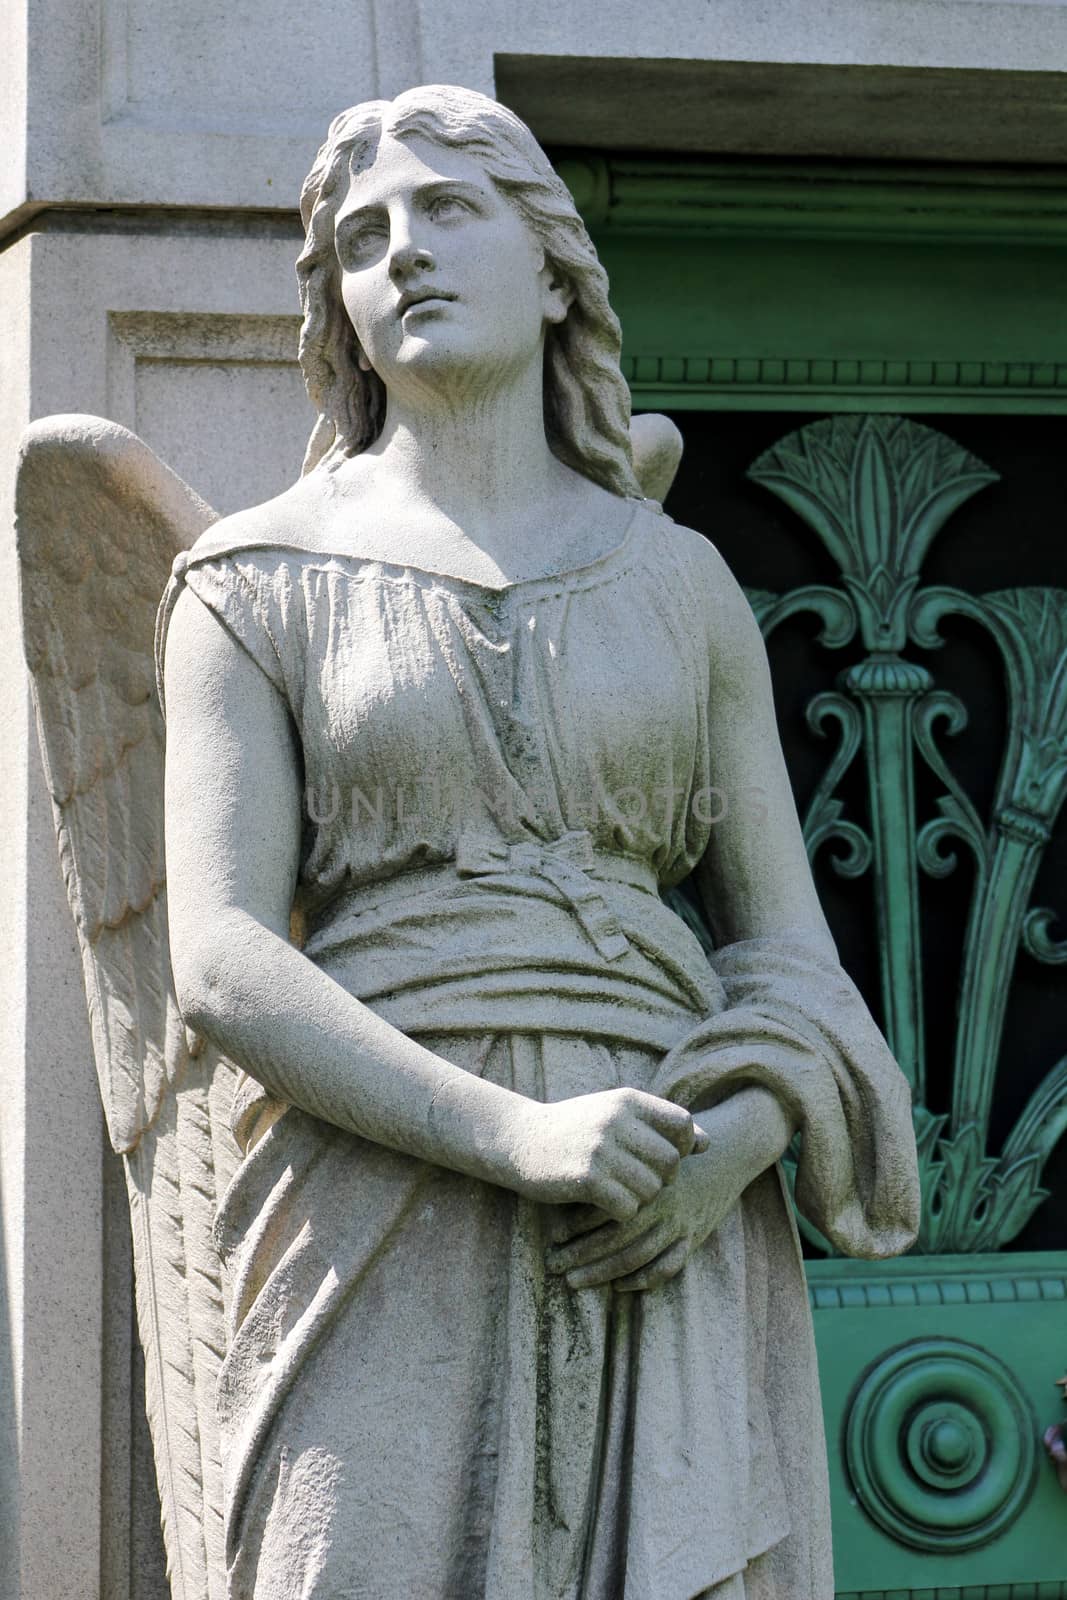 A stone statue of a young female angel guards the green weathered door to a mausoleum at Graceland Cemetery, Chicago, Illinois, USA